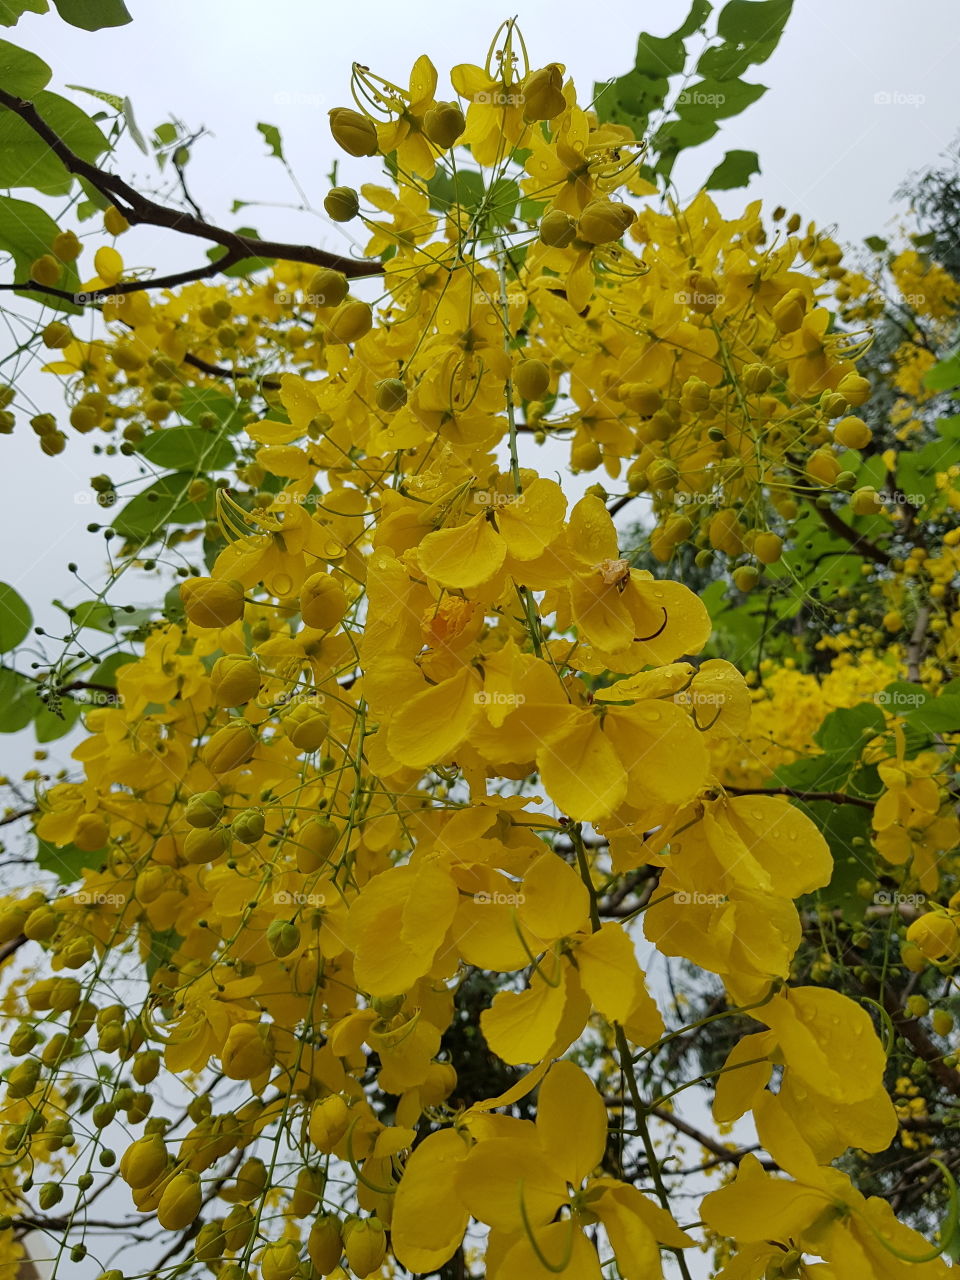 Cassia fistula, known as the golden rain tree, canafistula and by other names, is a flowering plant in the family Fabaceae. It is the national tree of Thailand, and its flower is Thailand's national flower.